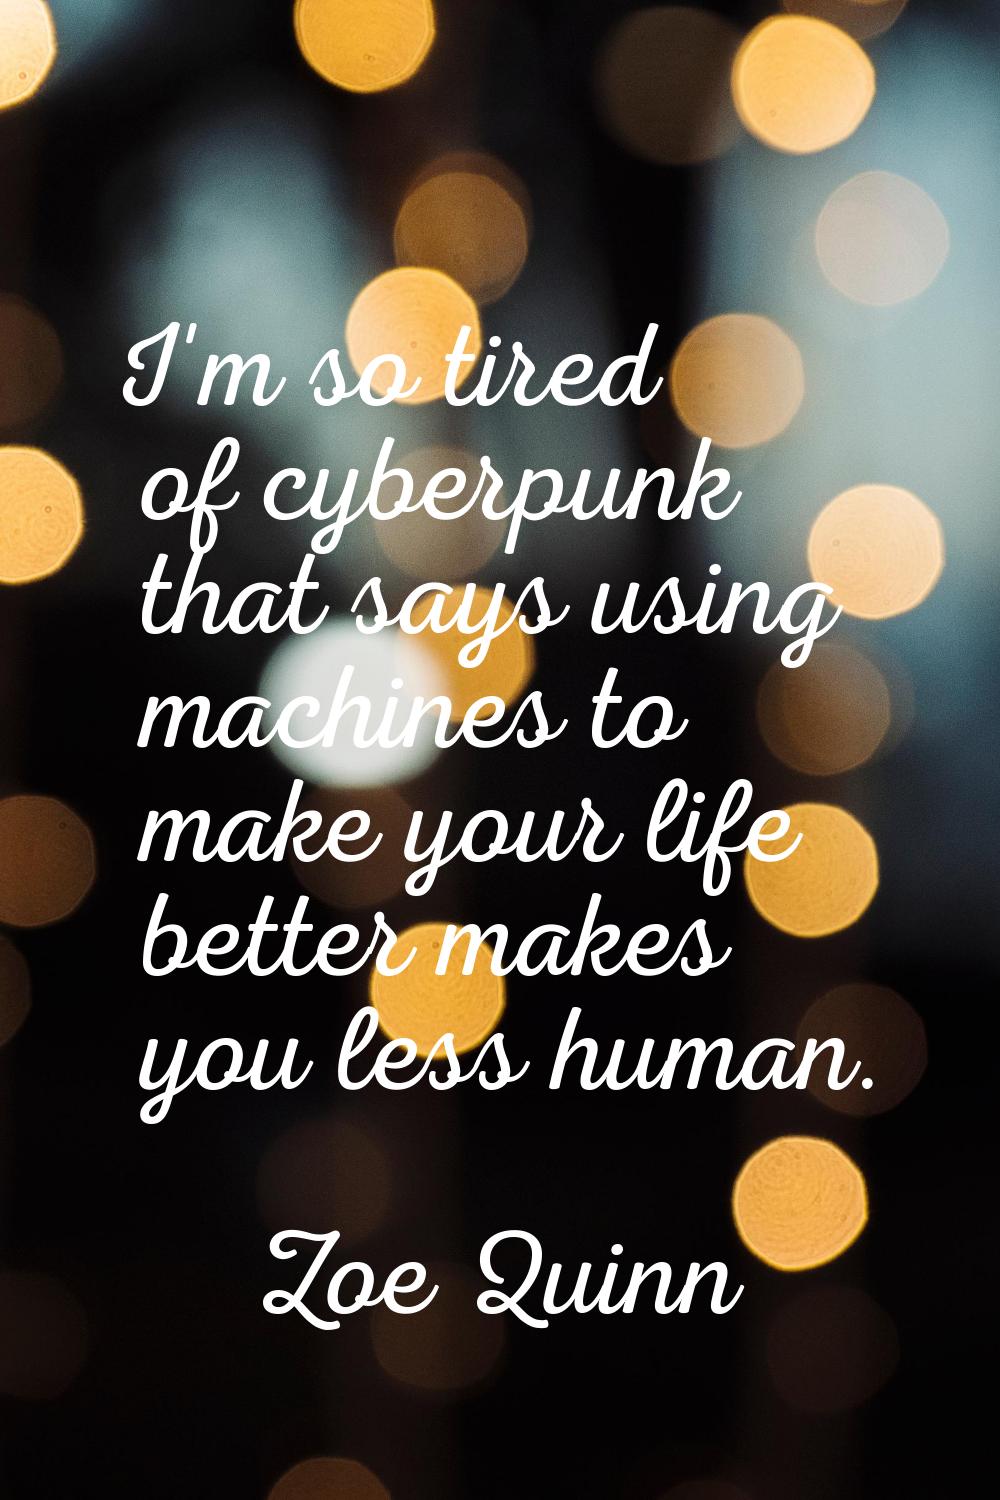 I'm so tired of cyberpunk that says using machines to make your life better makes you less human.